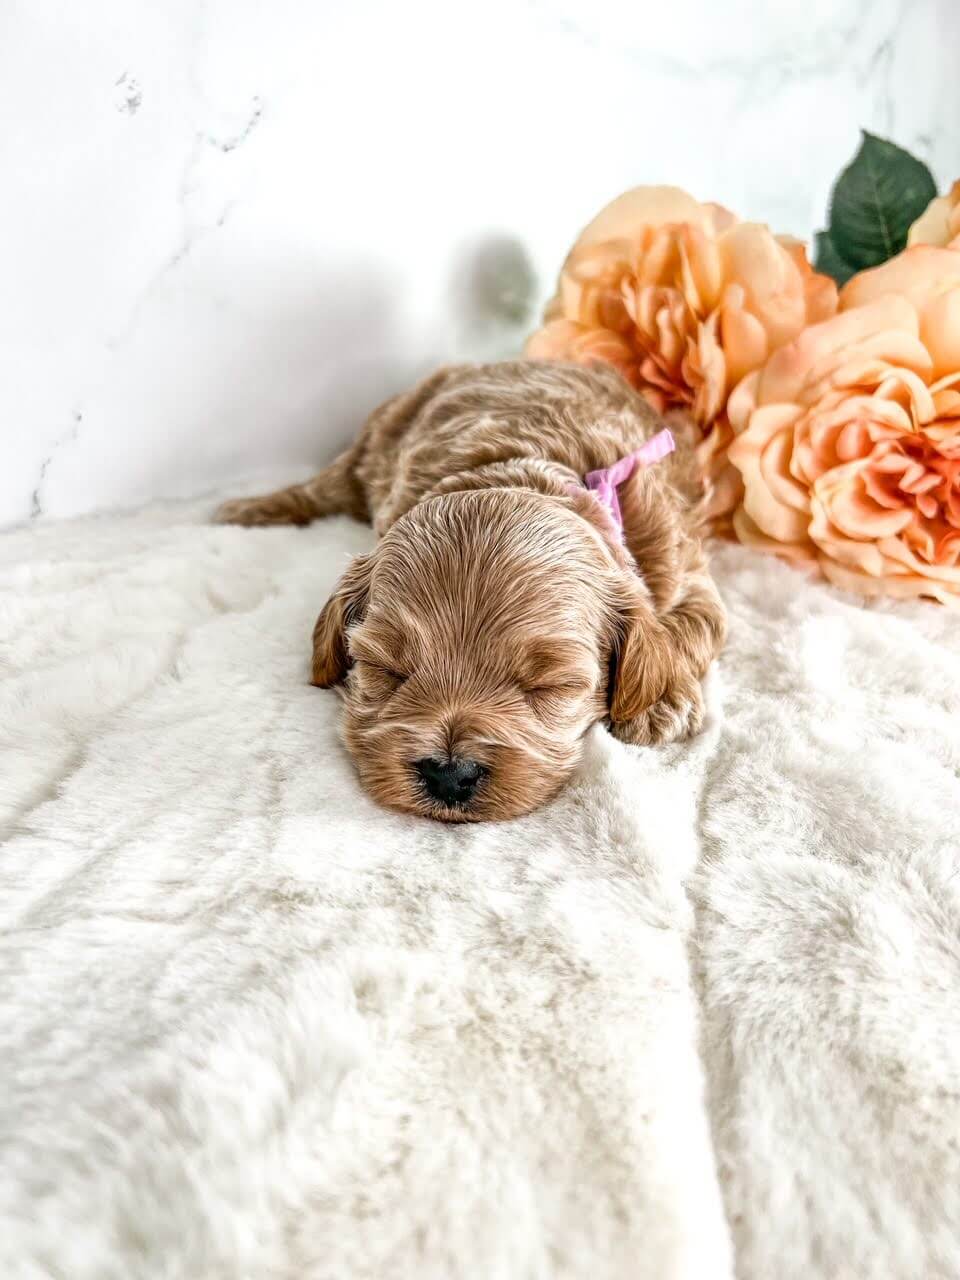 One of the breed of goldendoodles puppy peacefully rests beside a vibrant bouquet of flowers, creating a heartwarming scene of tranquility and natural beauty.